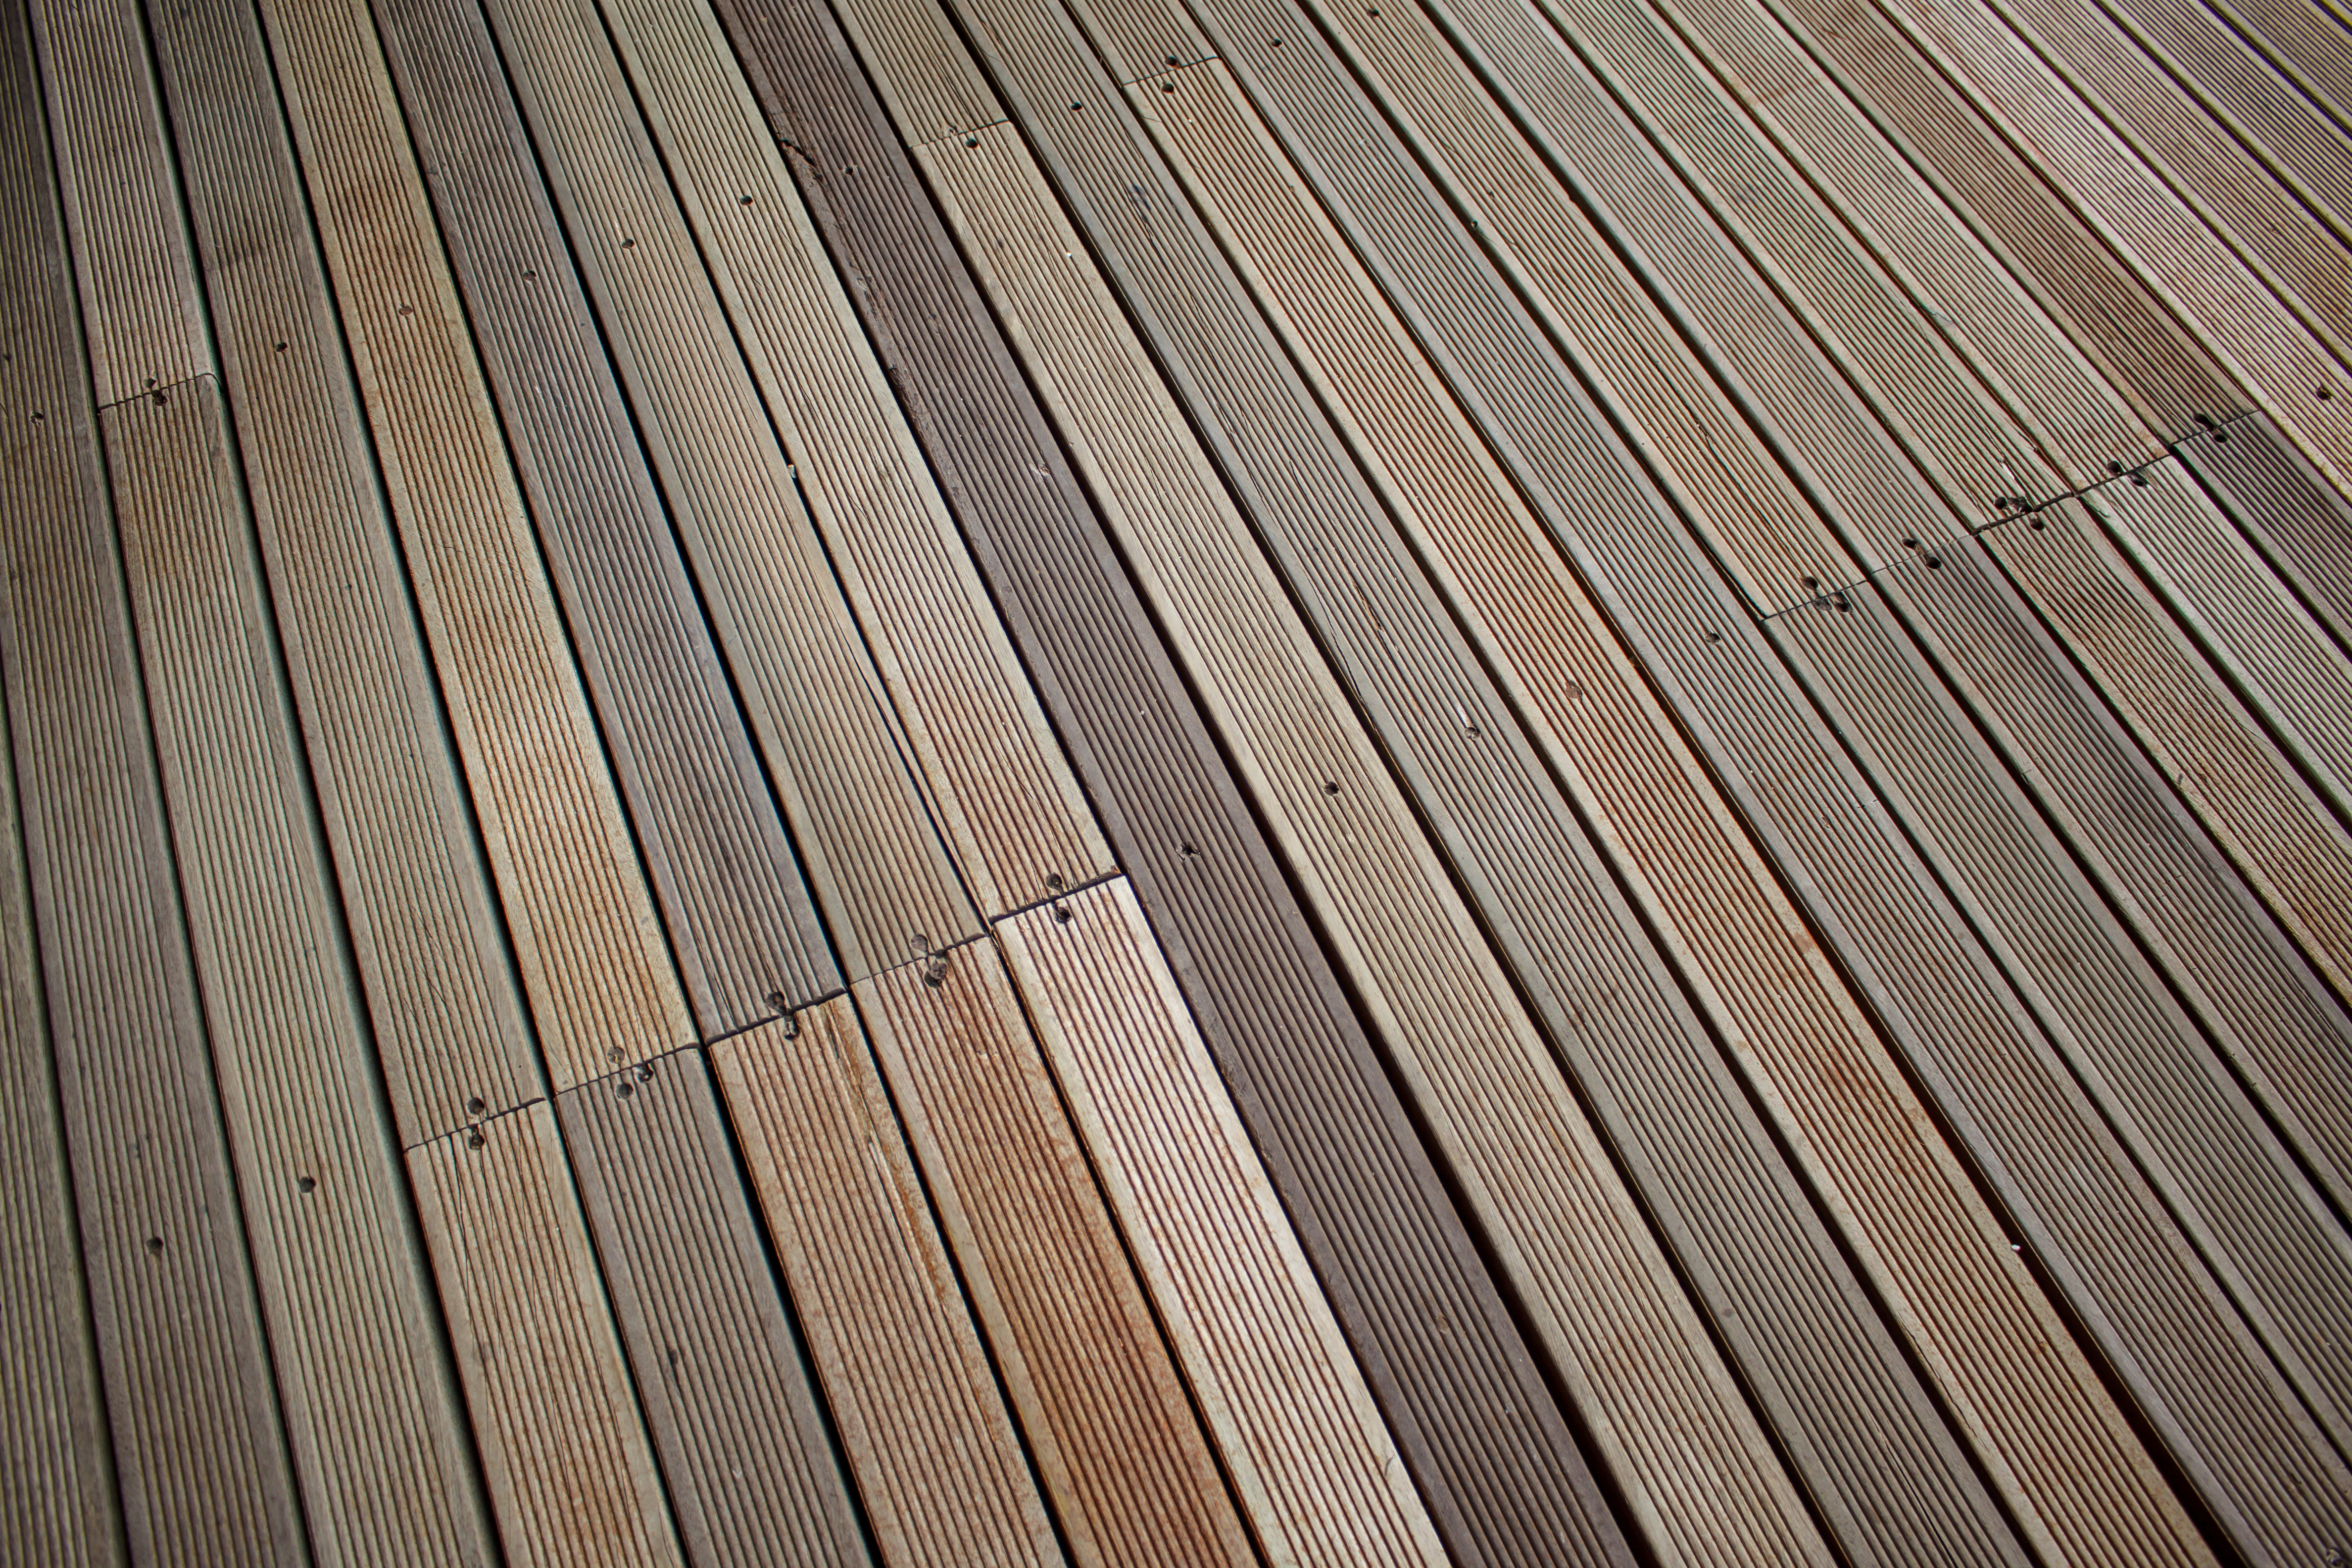 Deck replacement, wood deck